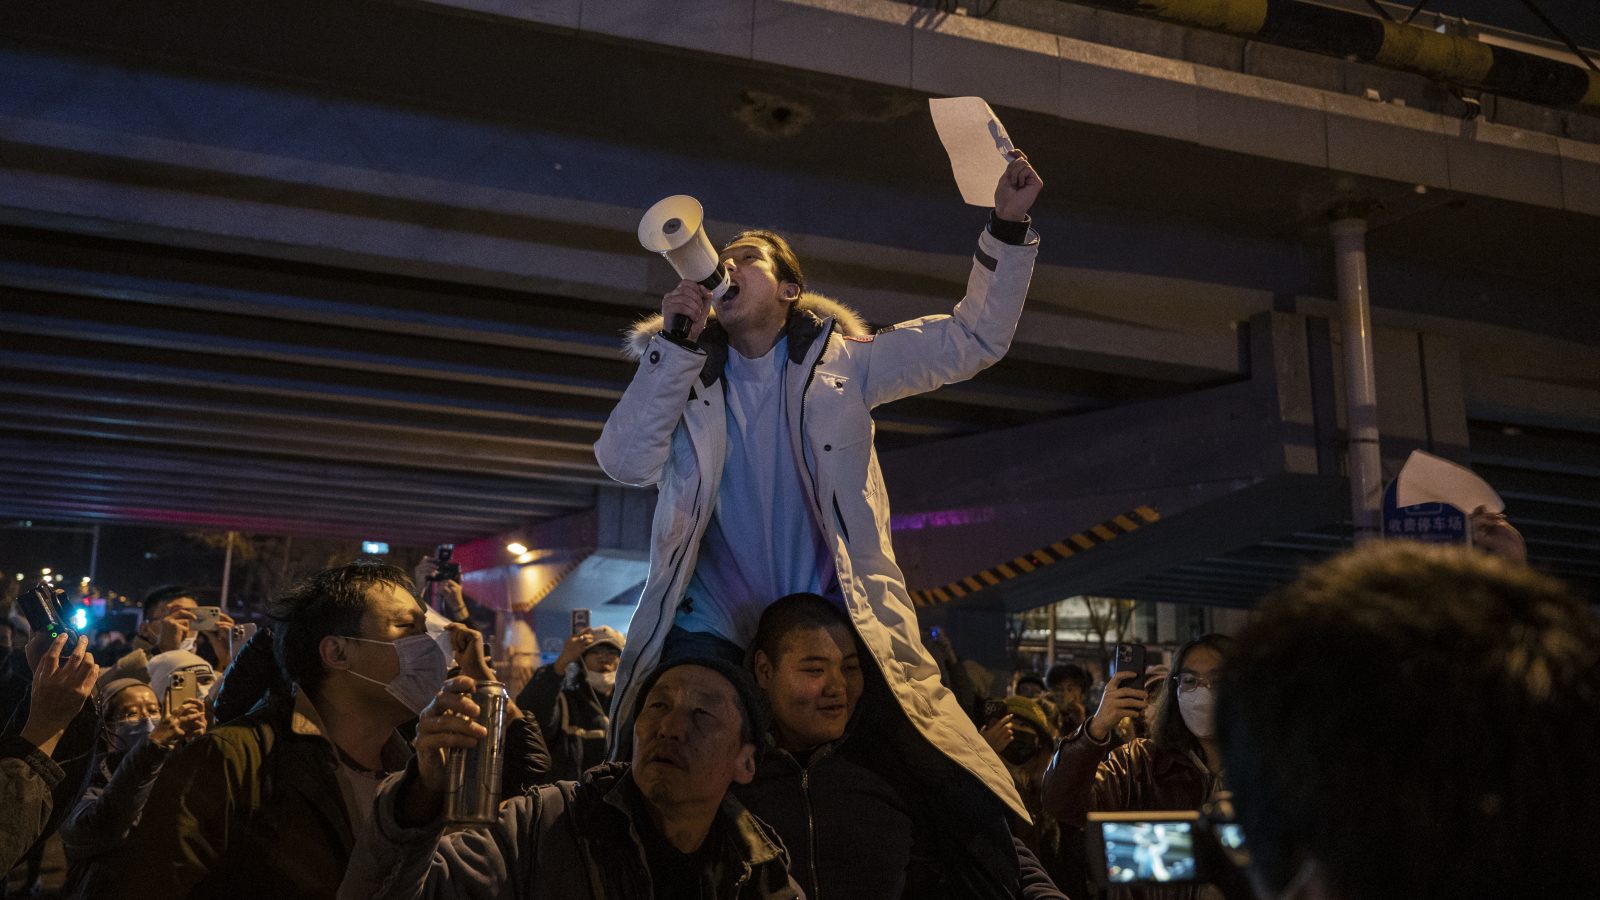 Graffiti, flyers, word of mouth: China’s protesters embrace low-tech organizing to escape surveillance